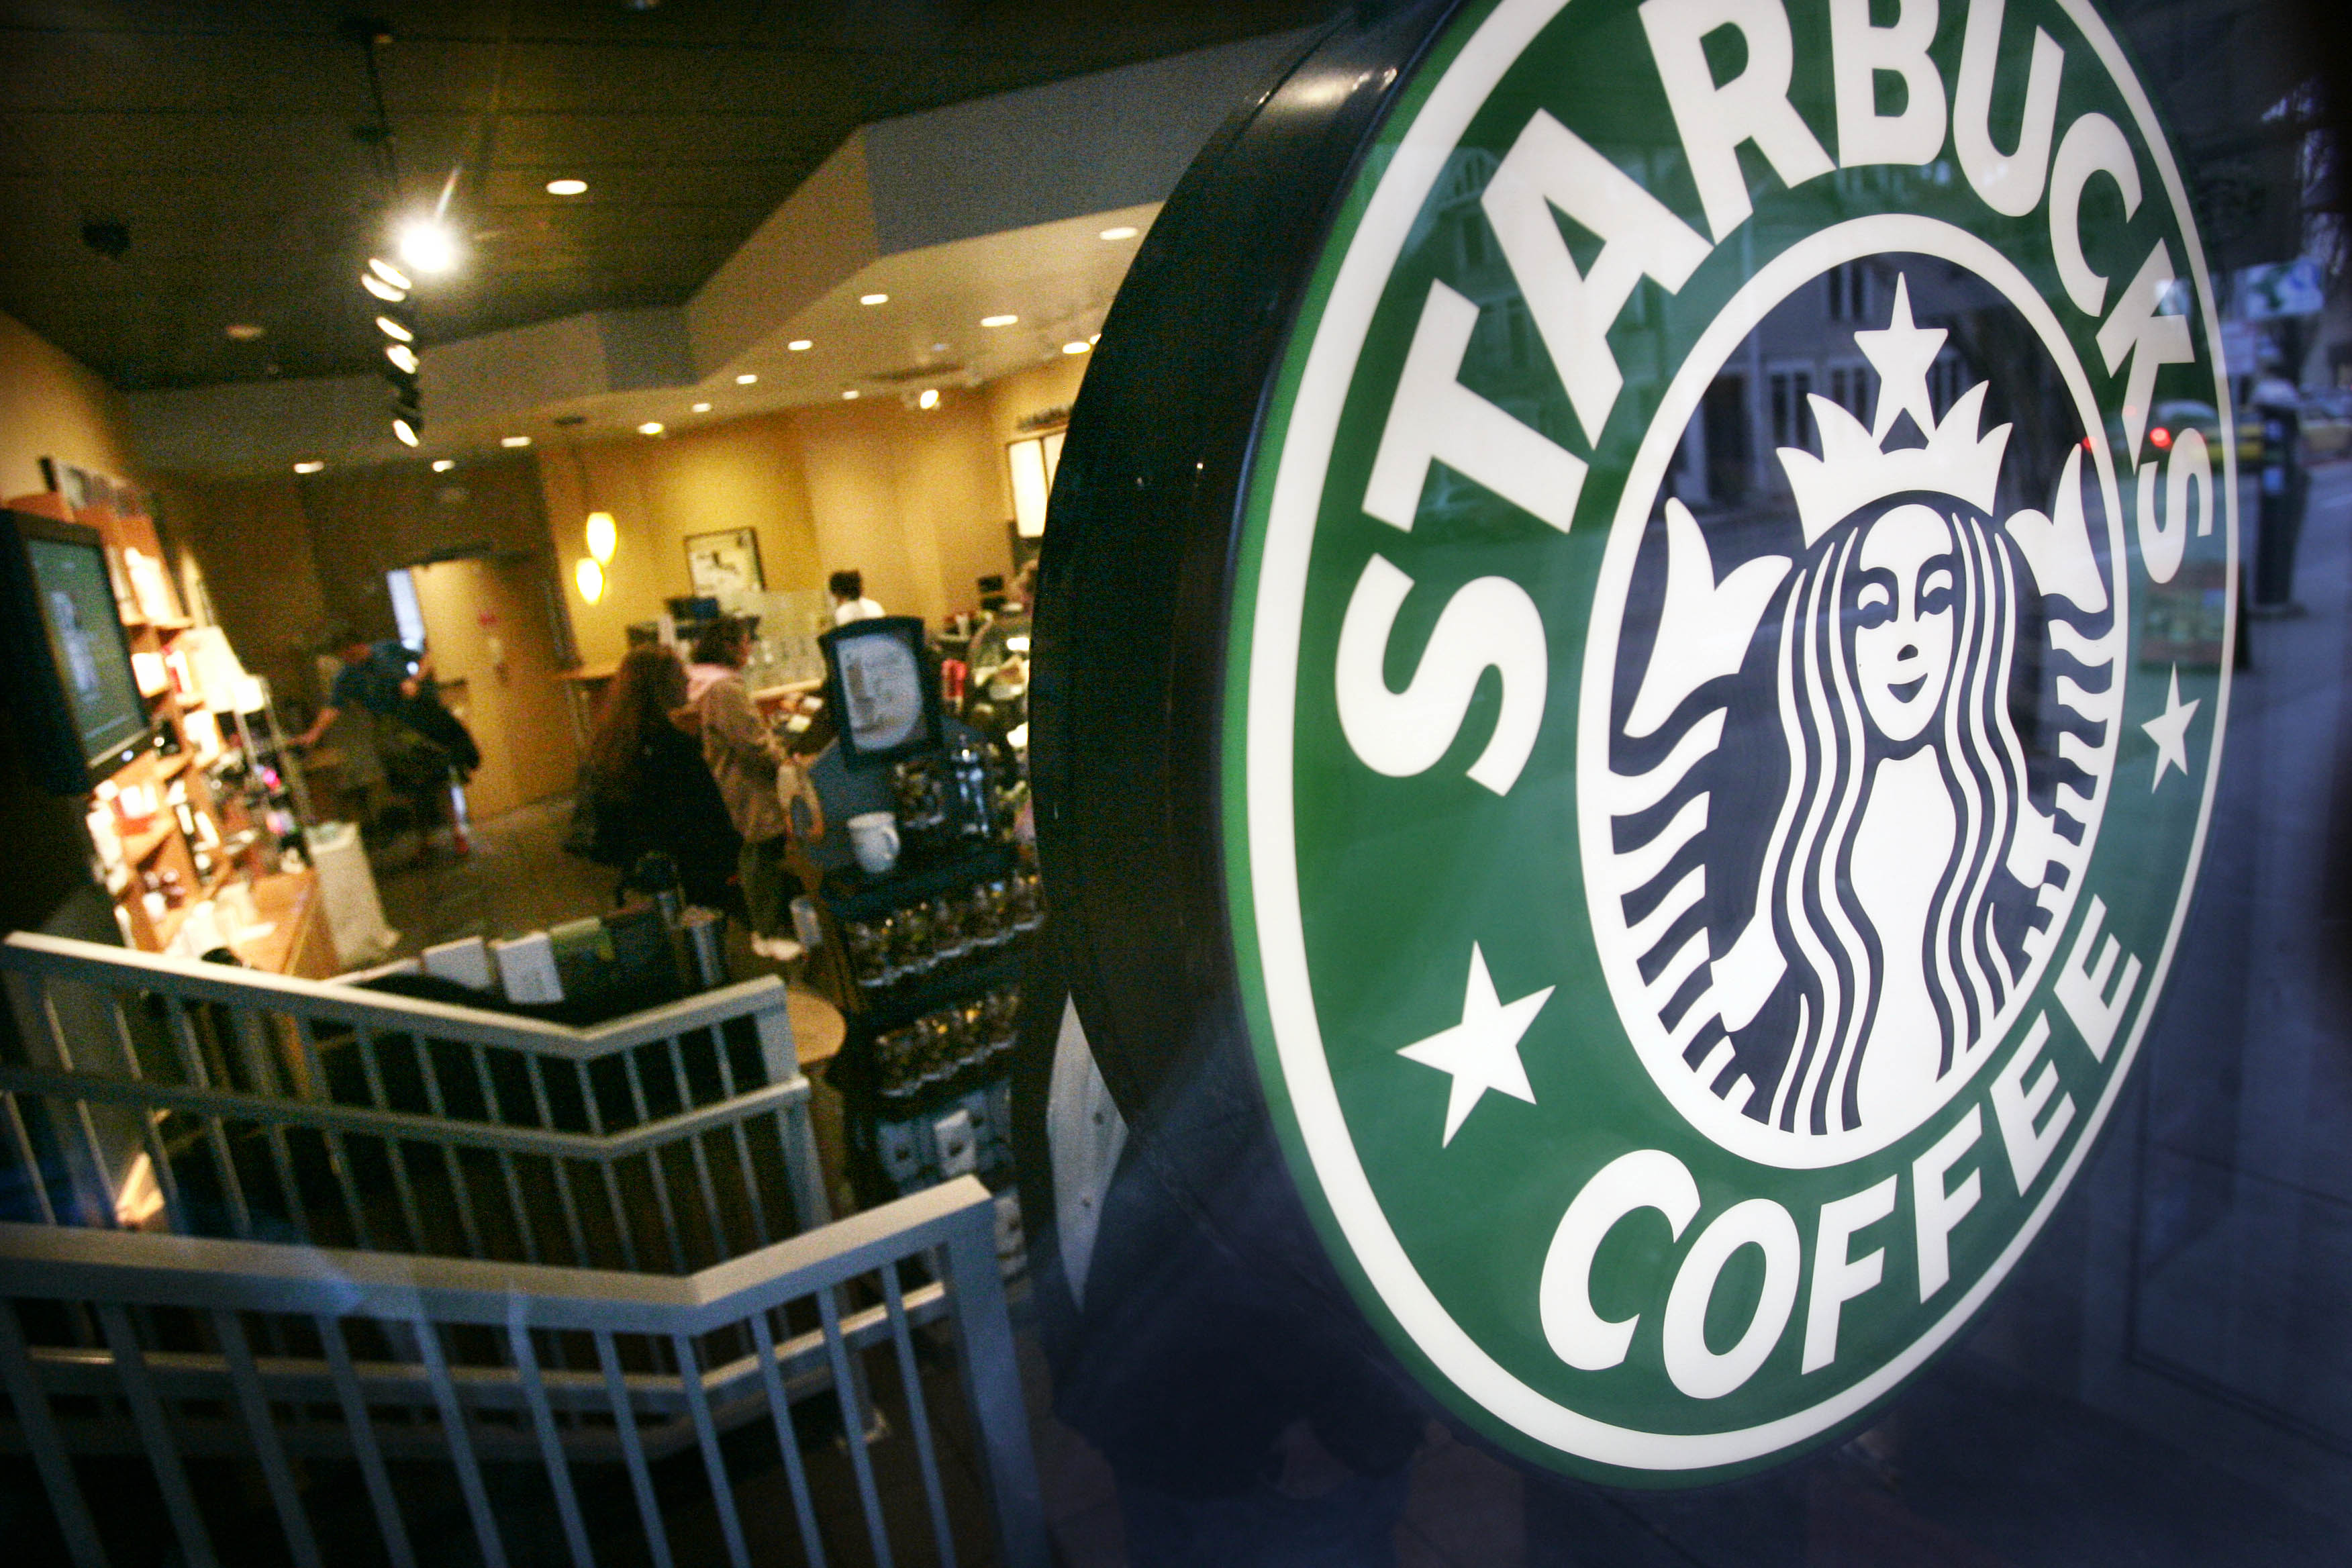 Starbucks, Dunkin’ Donuts want you for dinner